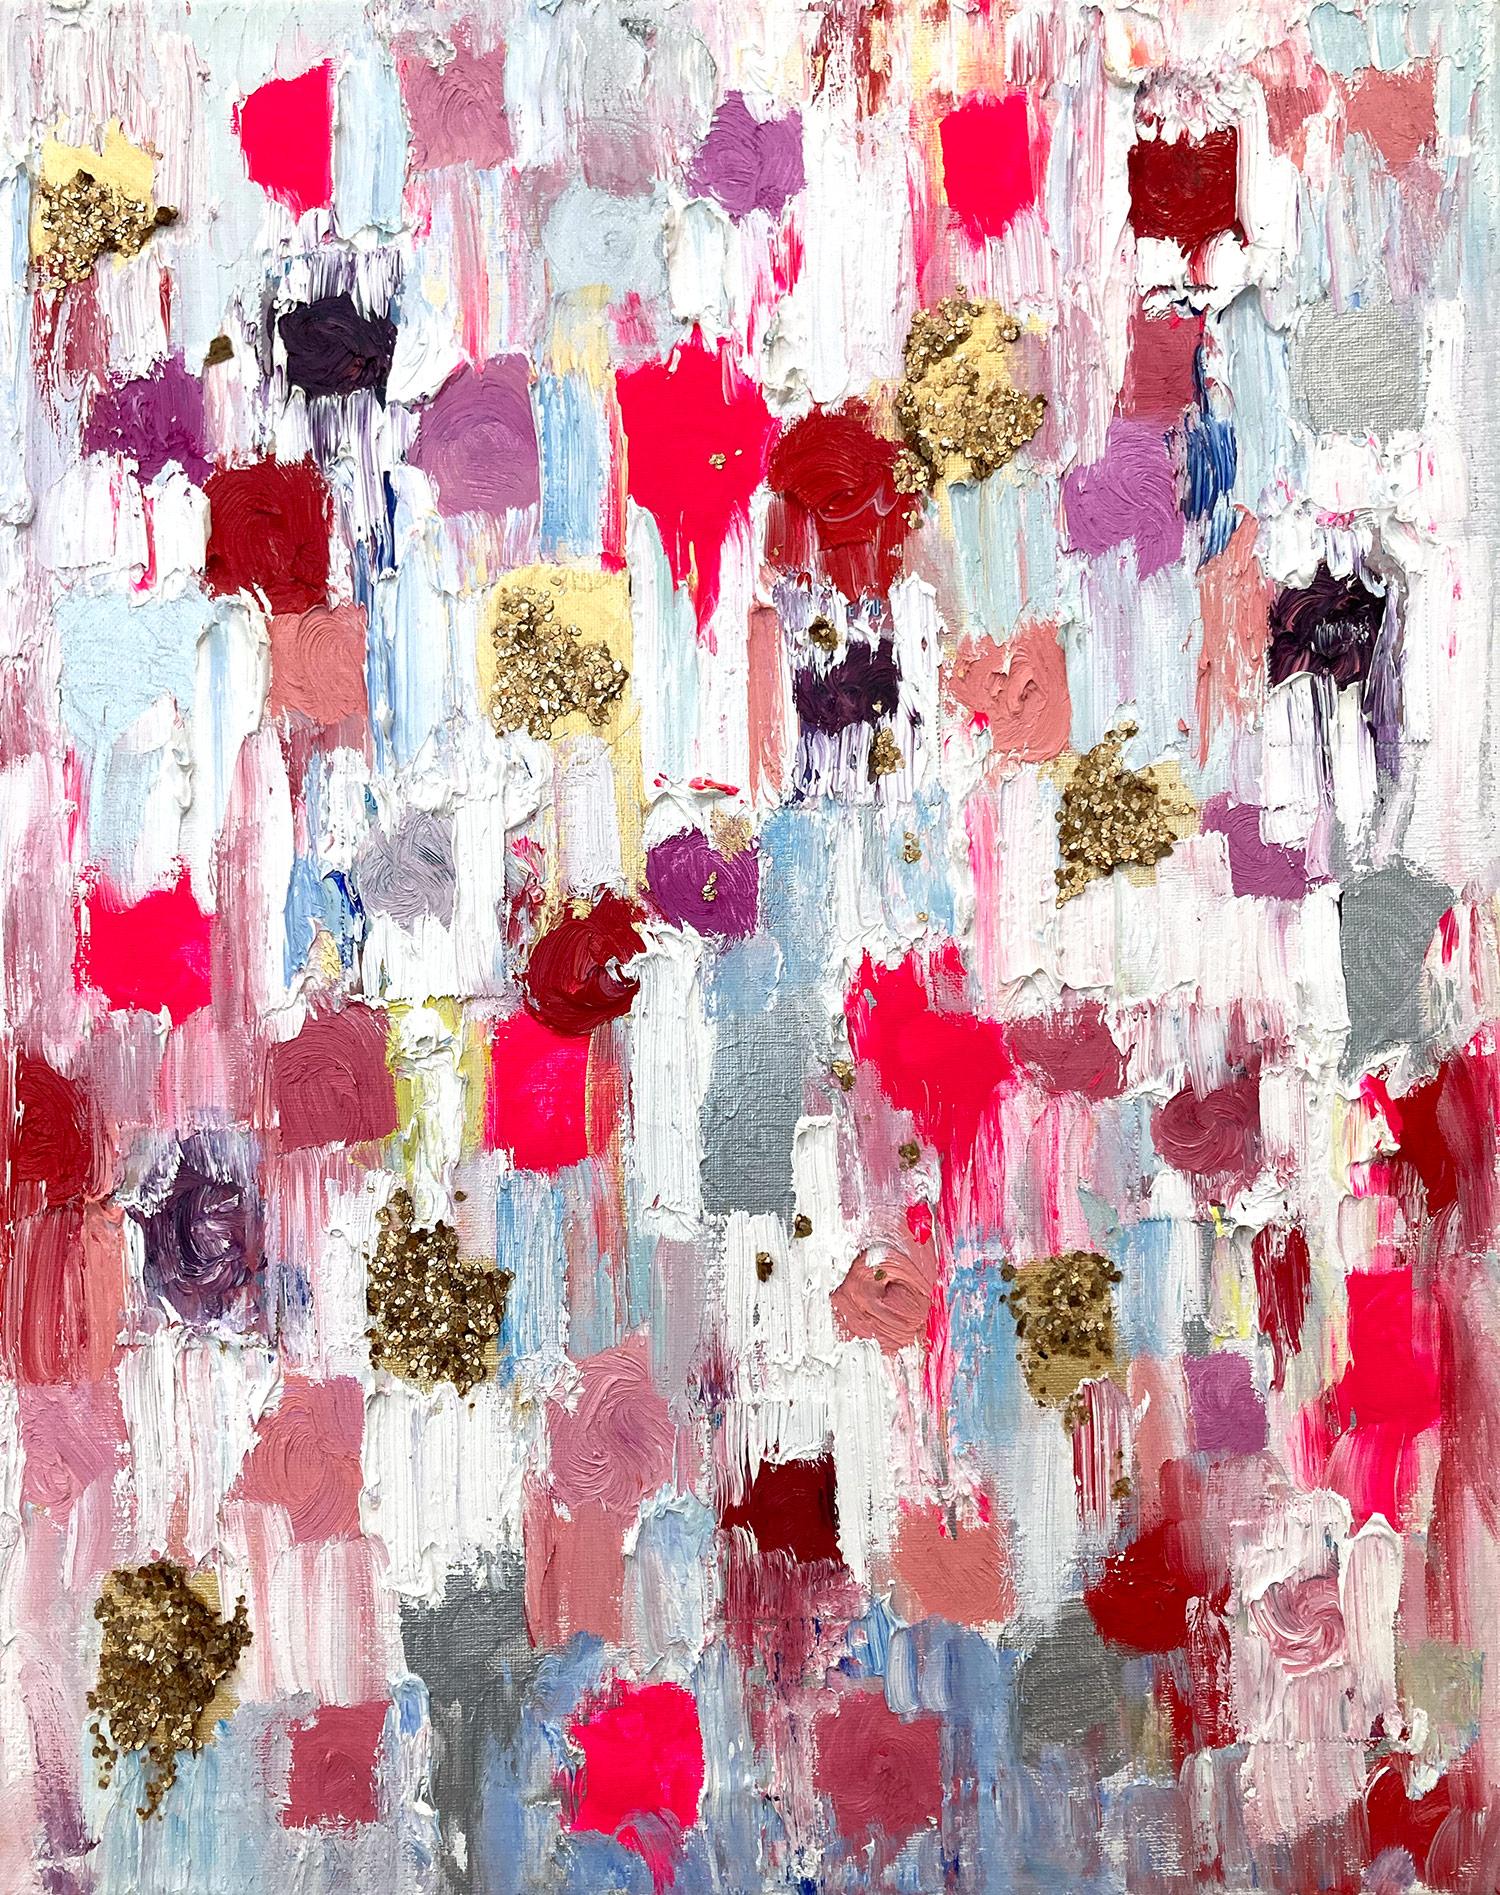 Abstract Painting Cindy Shaoul - "Dripping Dots - Pink Love, Hollywood Blvd" Peinture à l'huile colorée sur toile